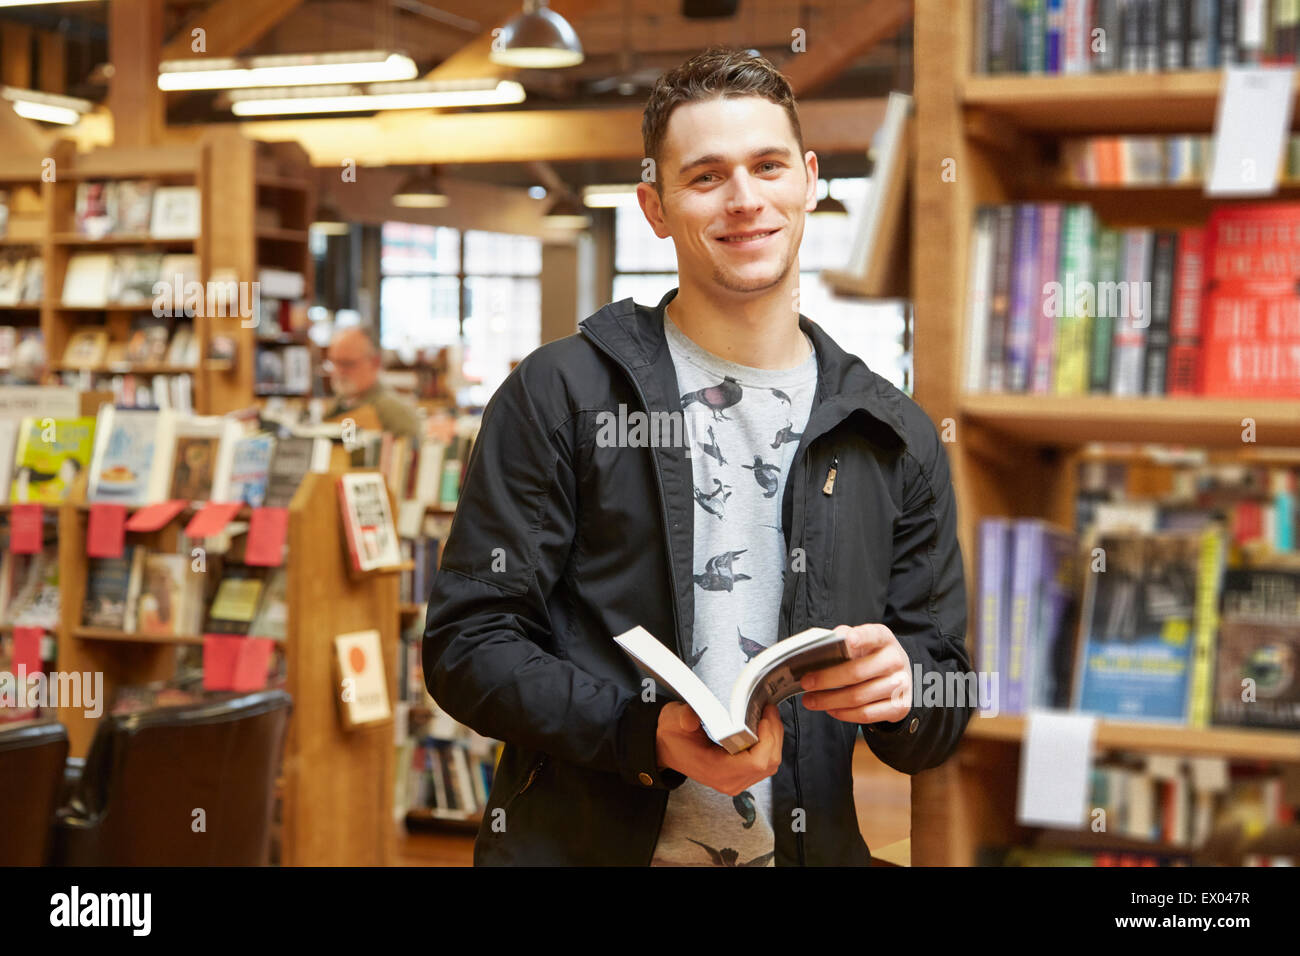 Portrait of young man in book store Stock Photo